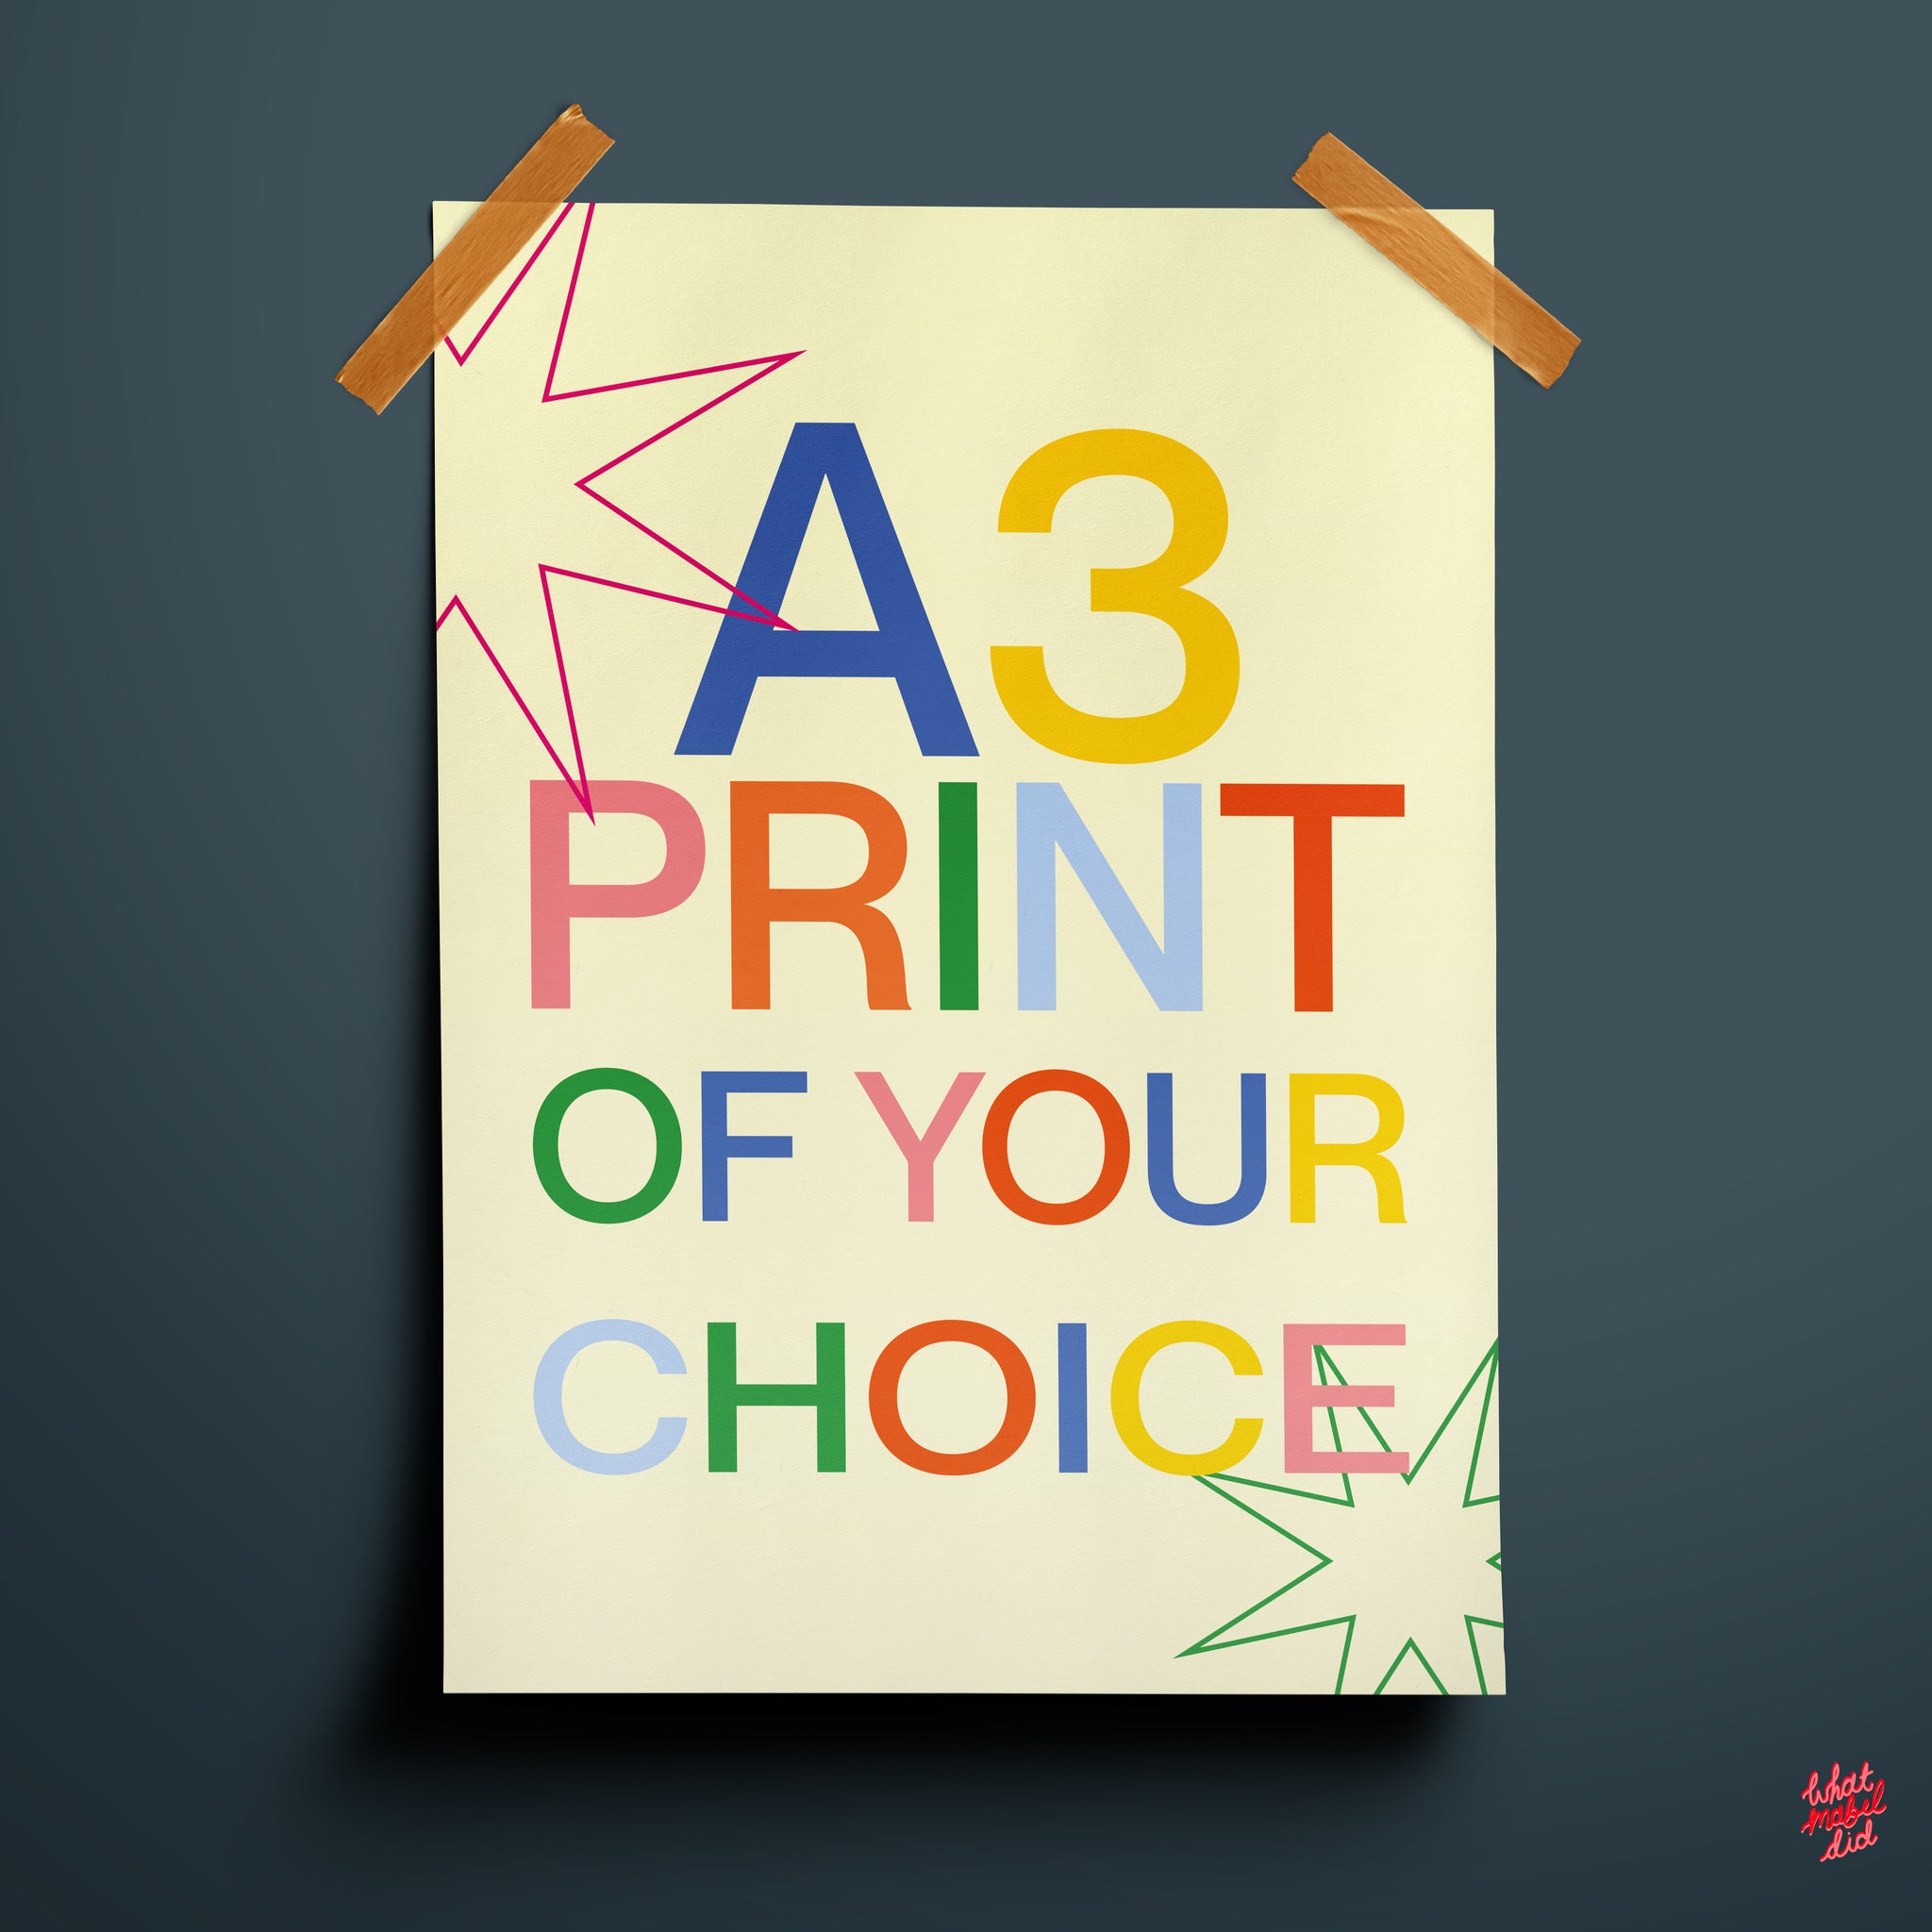 A3 print of your choice